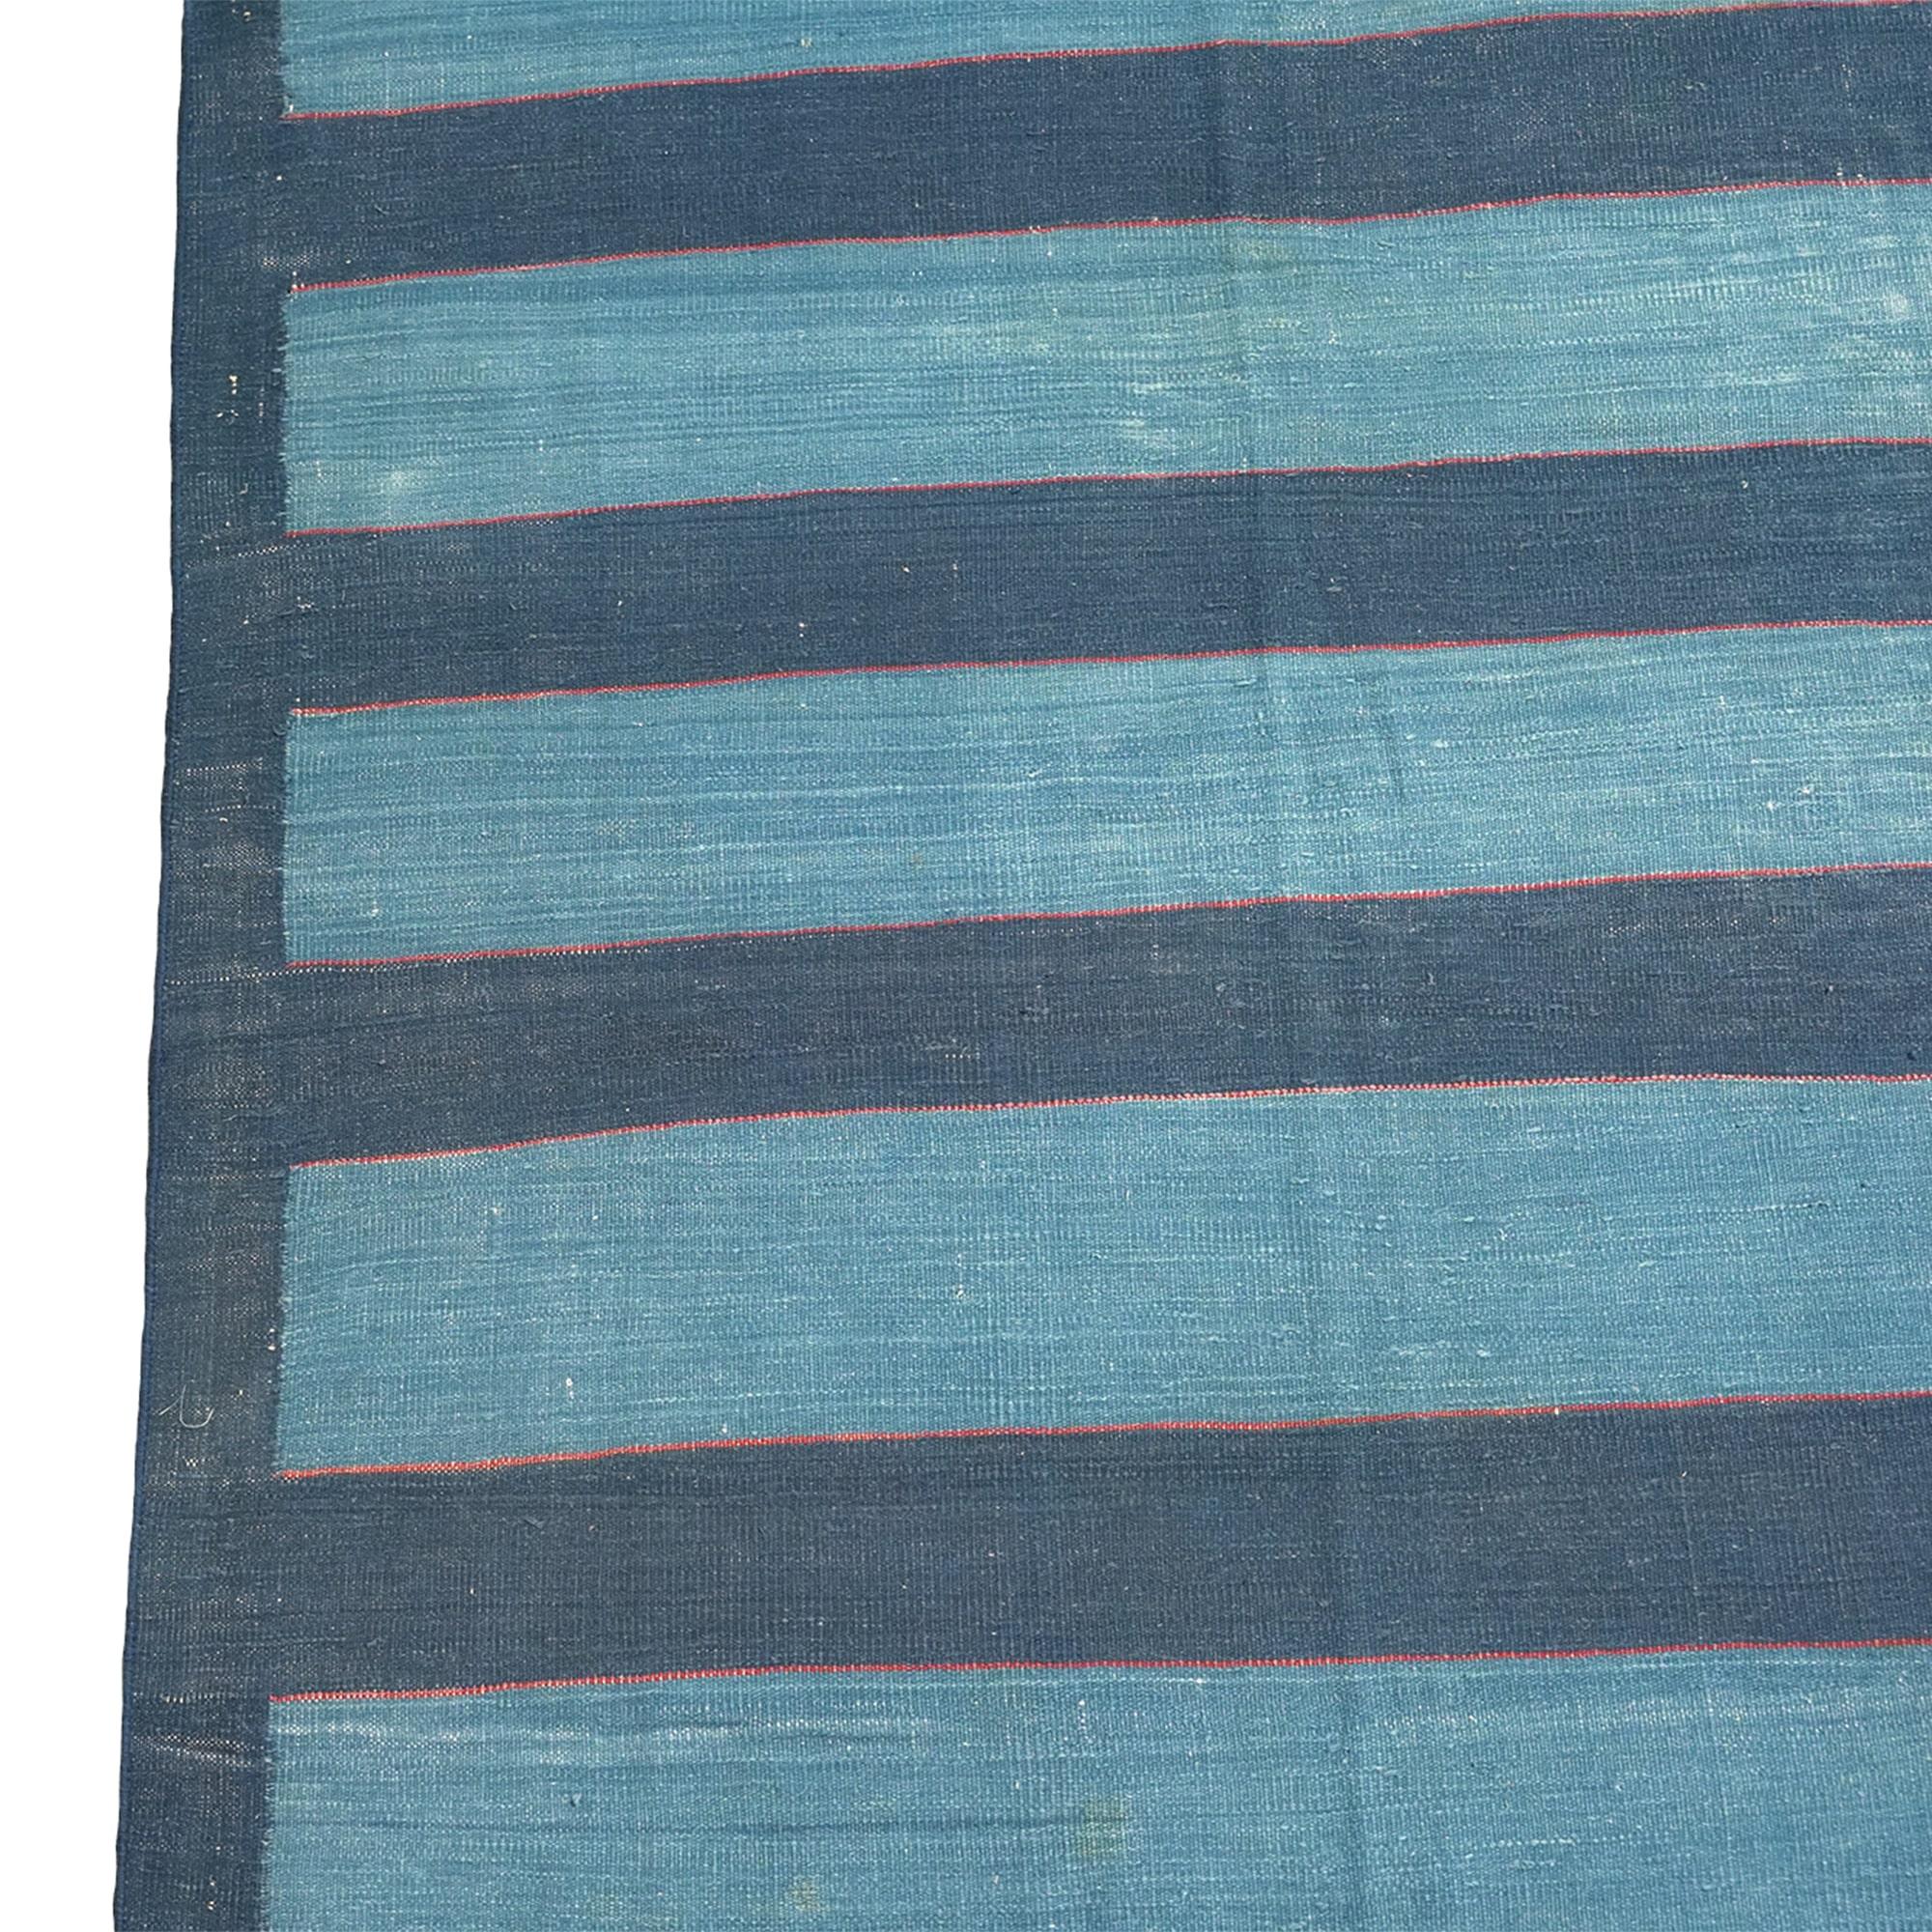 Hand-Woven Vintage Dhurrie Rug, with Blue Stripes, from Rug & Kilim For Sale